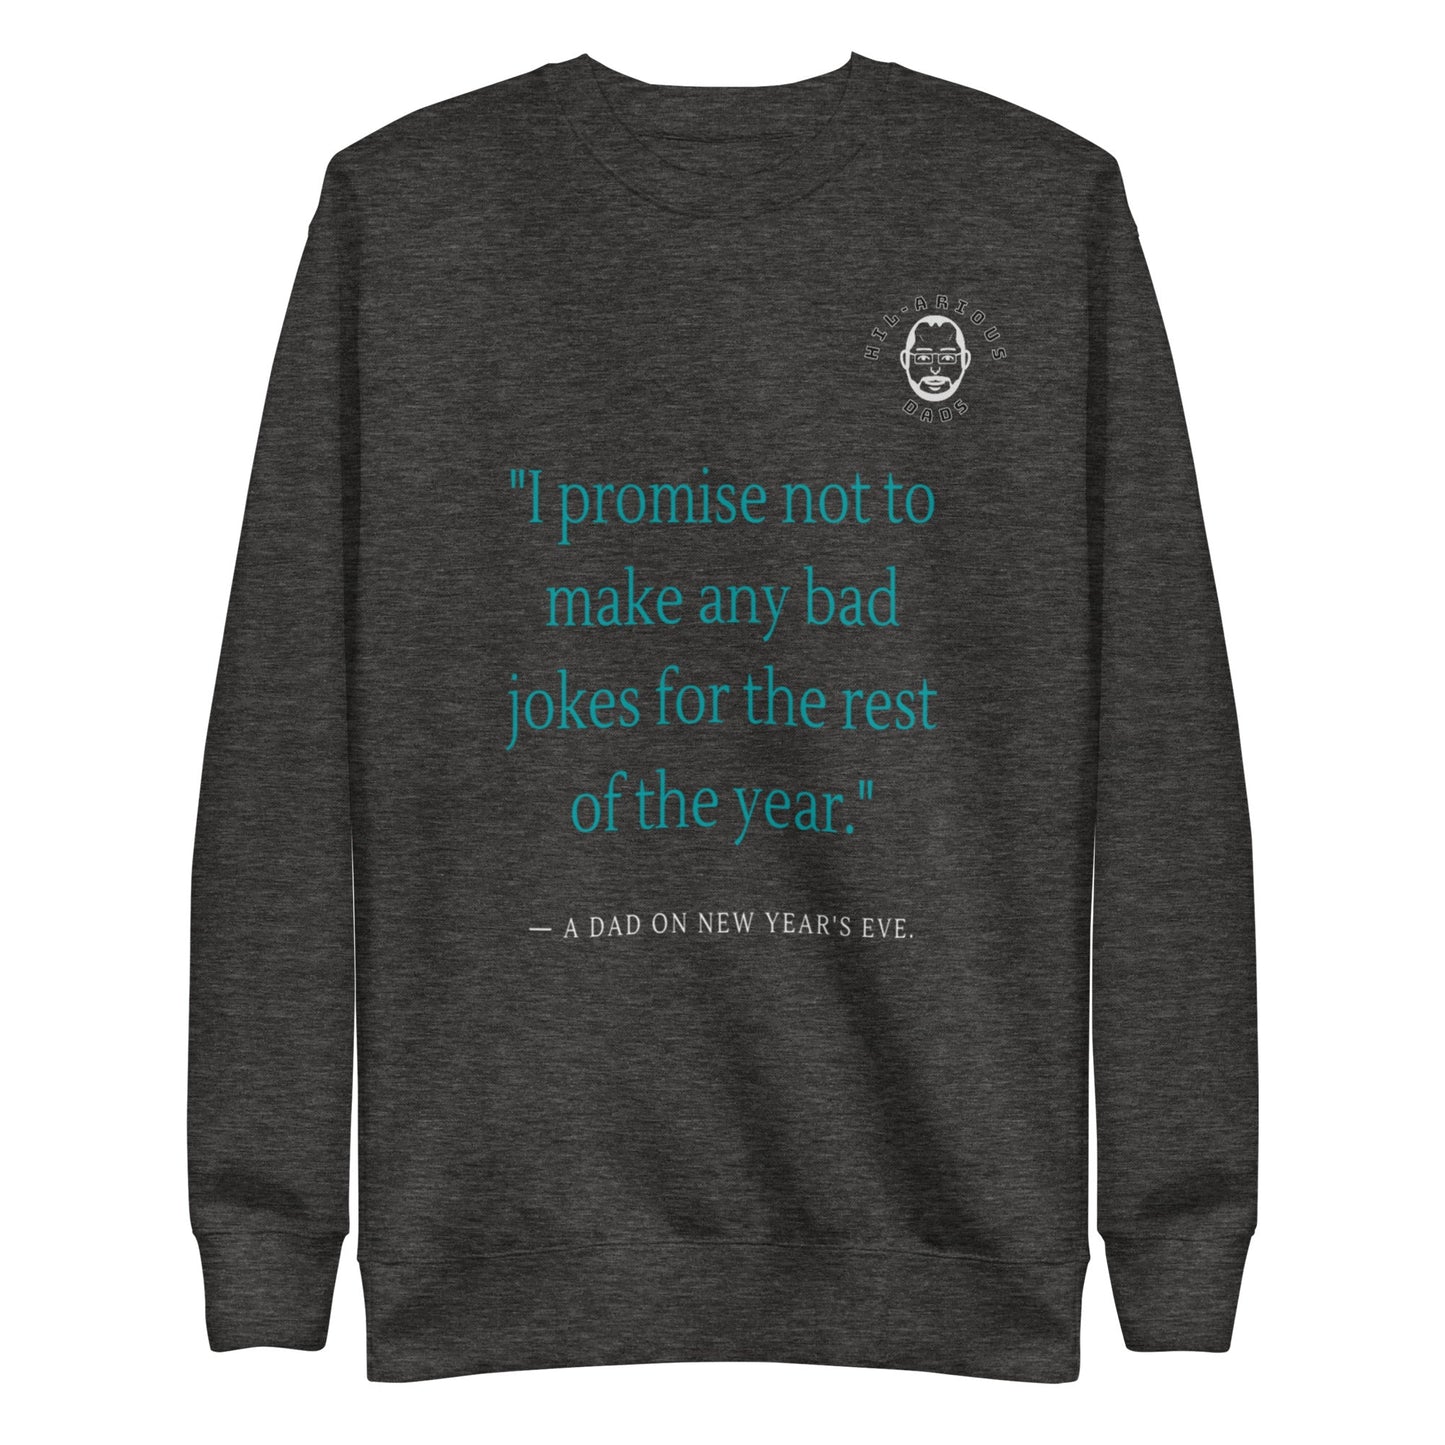 A dad's promise on New Year's Eve-Sweatshirt - Hil-arious Dads